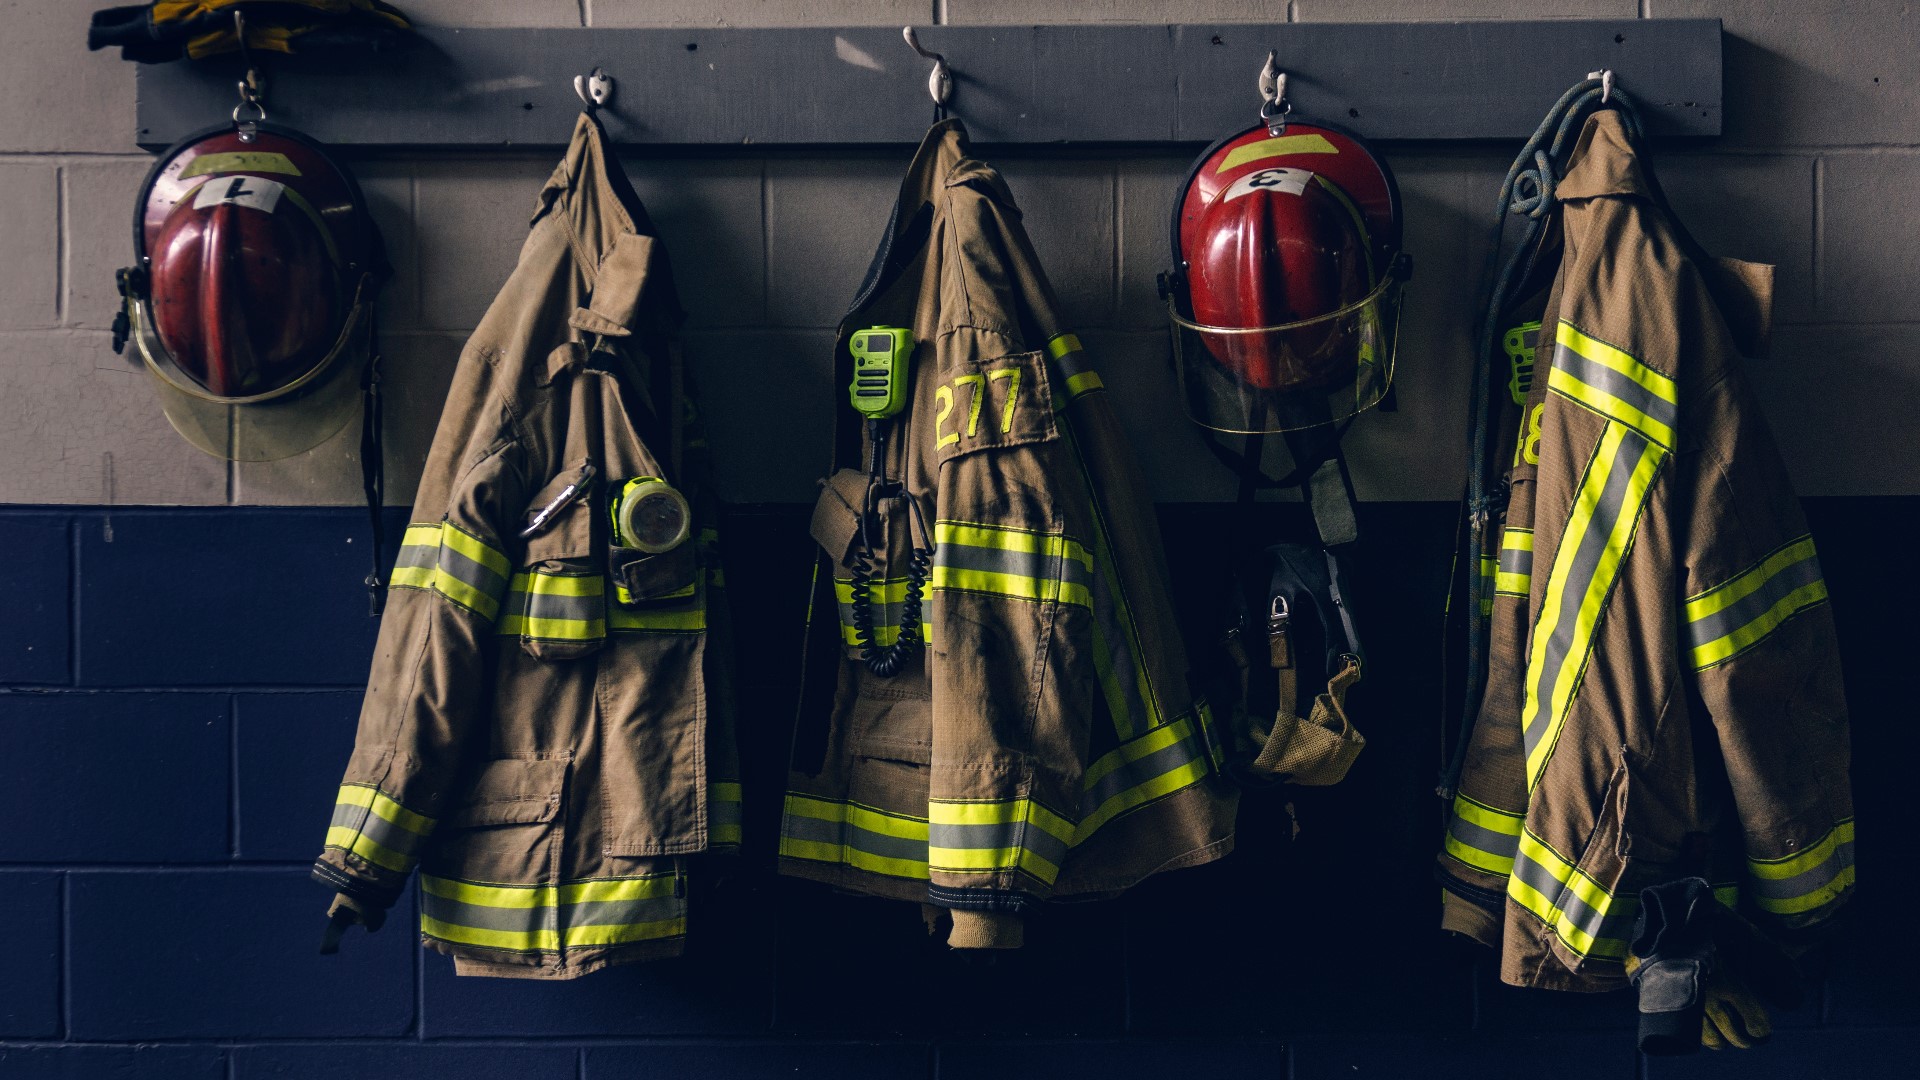 Even with the excessive heat, firefighters still have a job to do. In the summer, the fires they battle can reach temperatures upwards of 800 degrees.